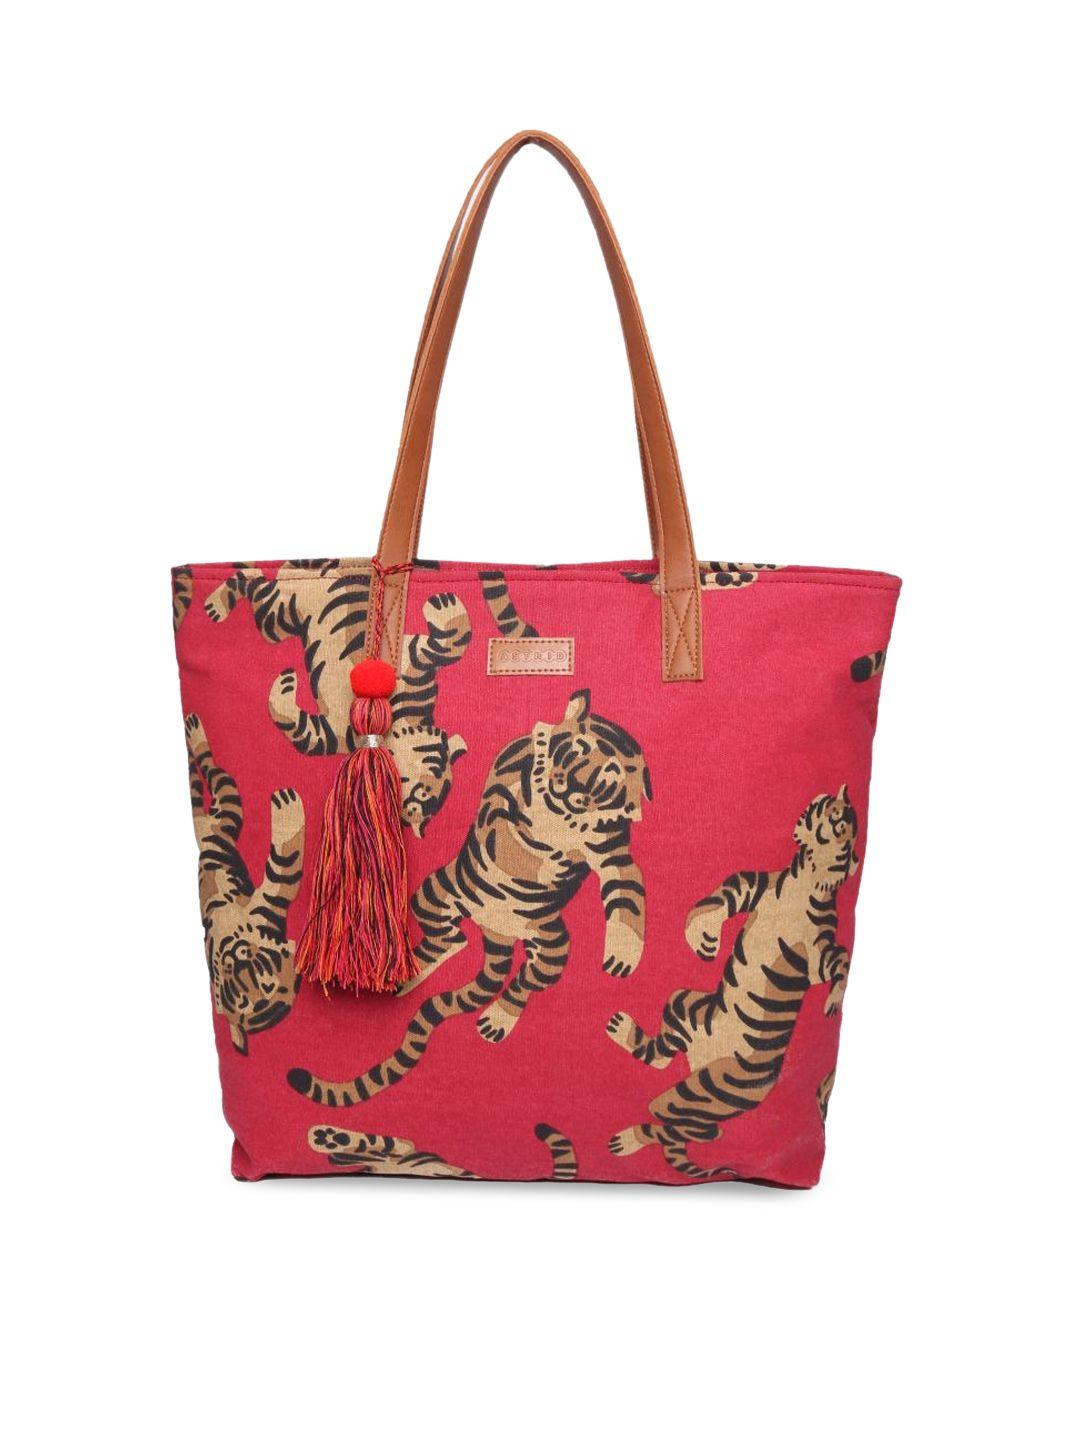 astrid printed oversized shopper tote bag with tasselled